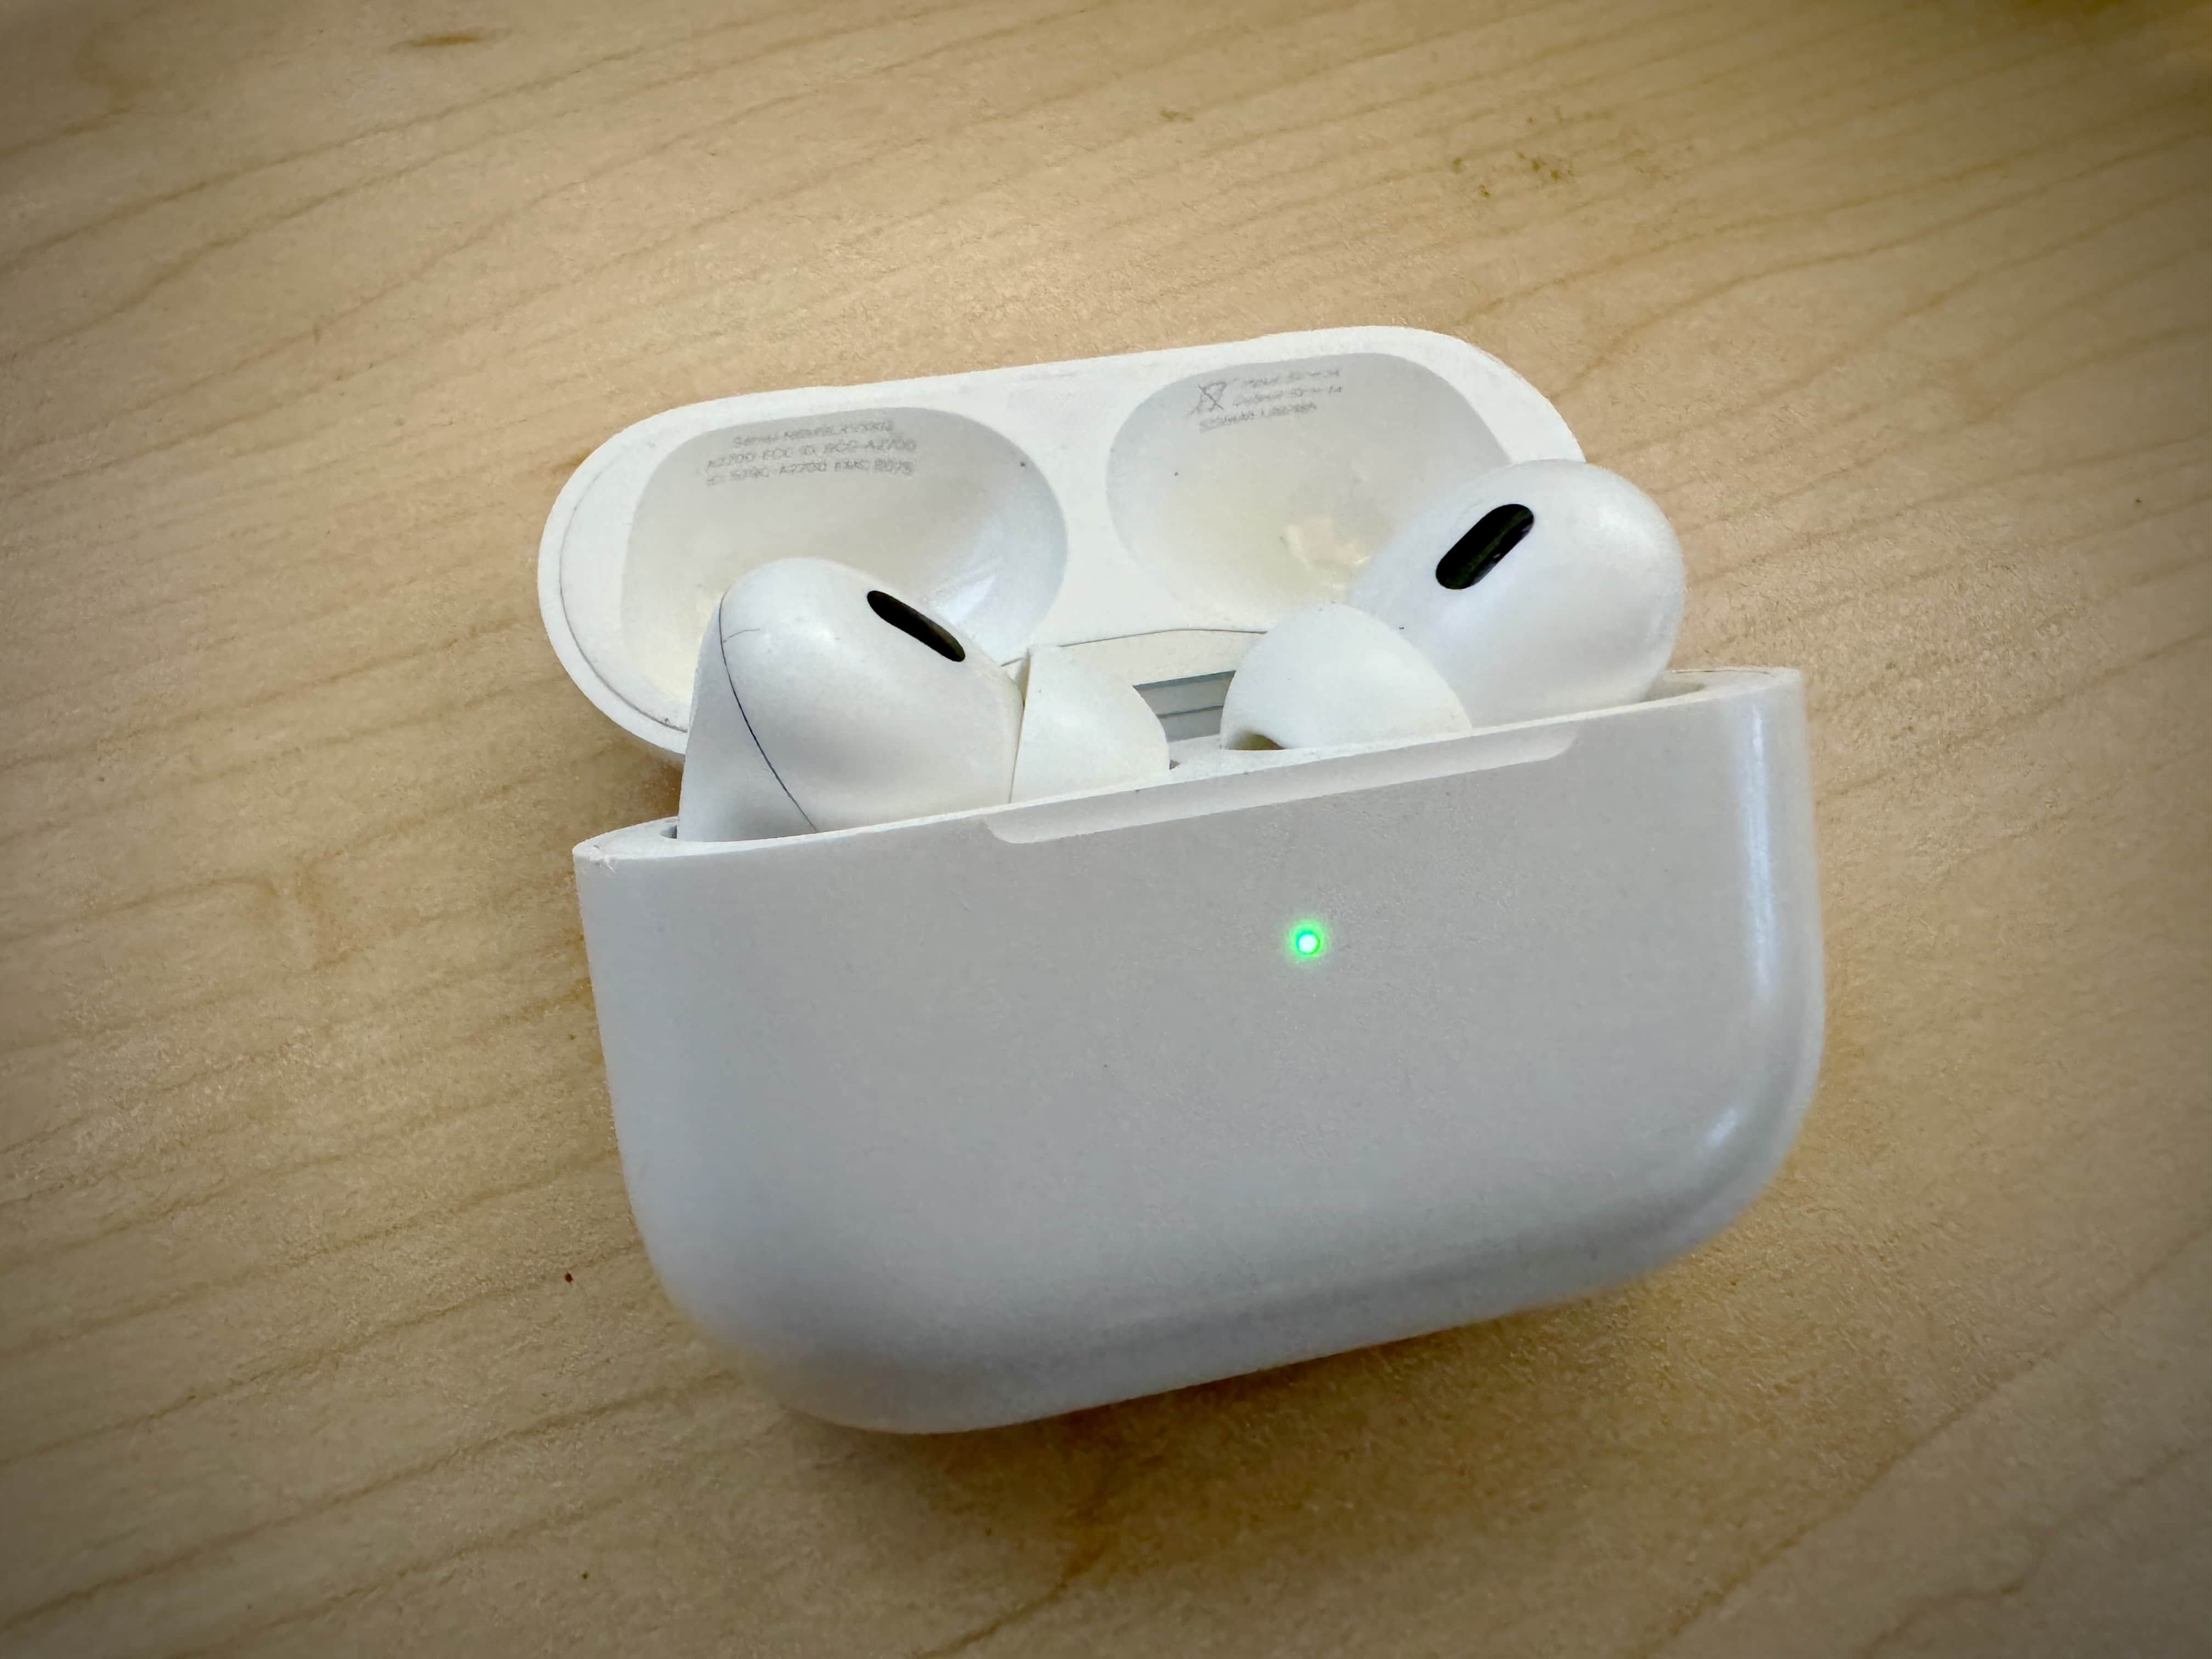 How to update AirPods; everything you need to know